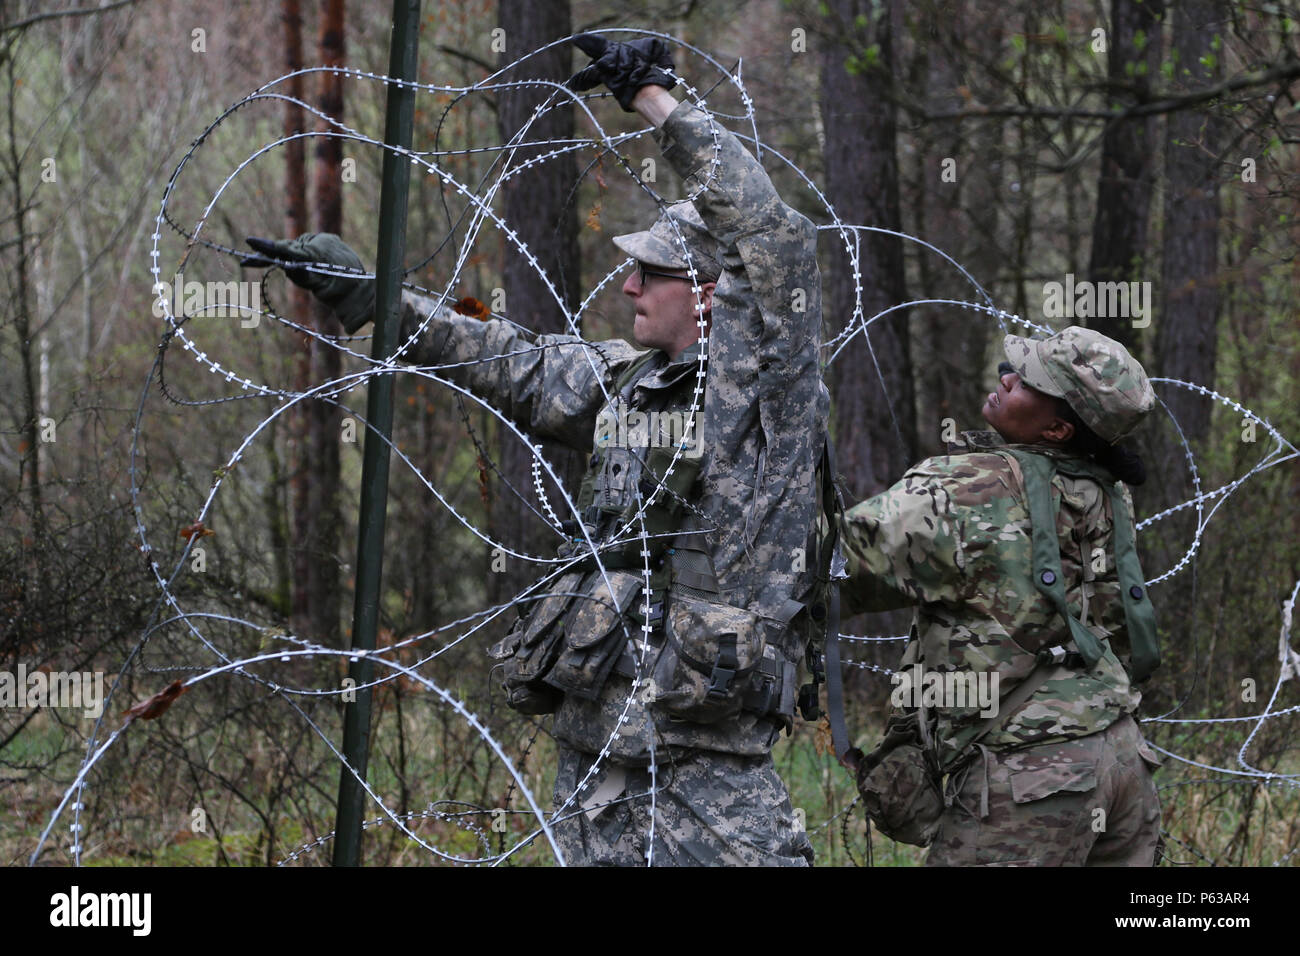 U.S. Soldiers of Fox Company, 4th Battalion, 319th Airborne Field Artillery Regiment, 173rd Airborne Brigade place concertina wire while constructing defensive obstacles during exercise Saber Junction 16 at the U.S. Army’s Joint Multinational Readiness Center (JMRC) in Hohenfels, Germany, April 17, 2016. Saber Junction 16 is the U.S. Army Europe’s 173rd Airborne Brigade’s combat training center certification exercise, taking place at the JMRC in Hohenfels, Germany, Mar. 31-Apr. 24, 2016.  The exercise is designed to evaluate the readiness of the Army’s Europe-based combat brigades to conduct u Stock Photo